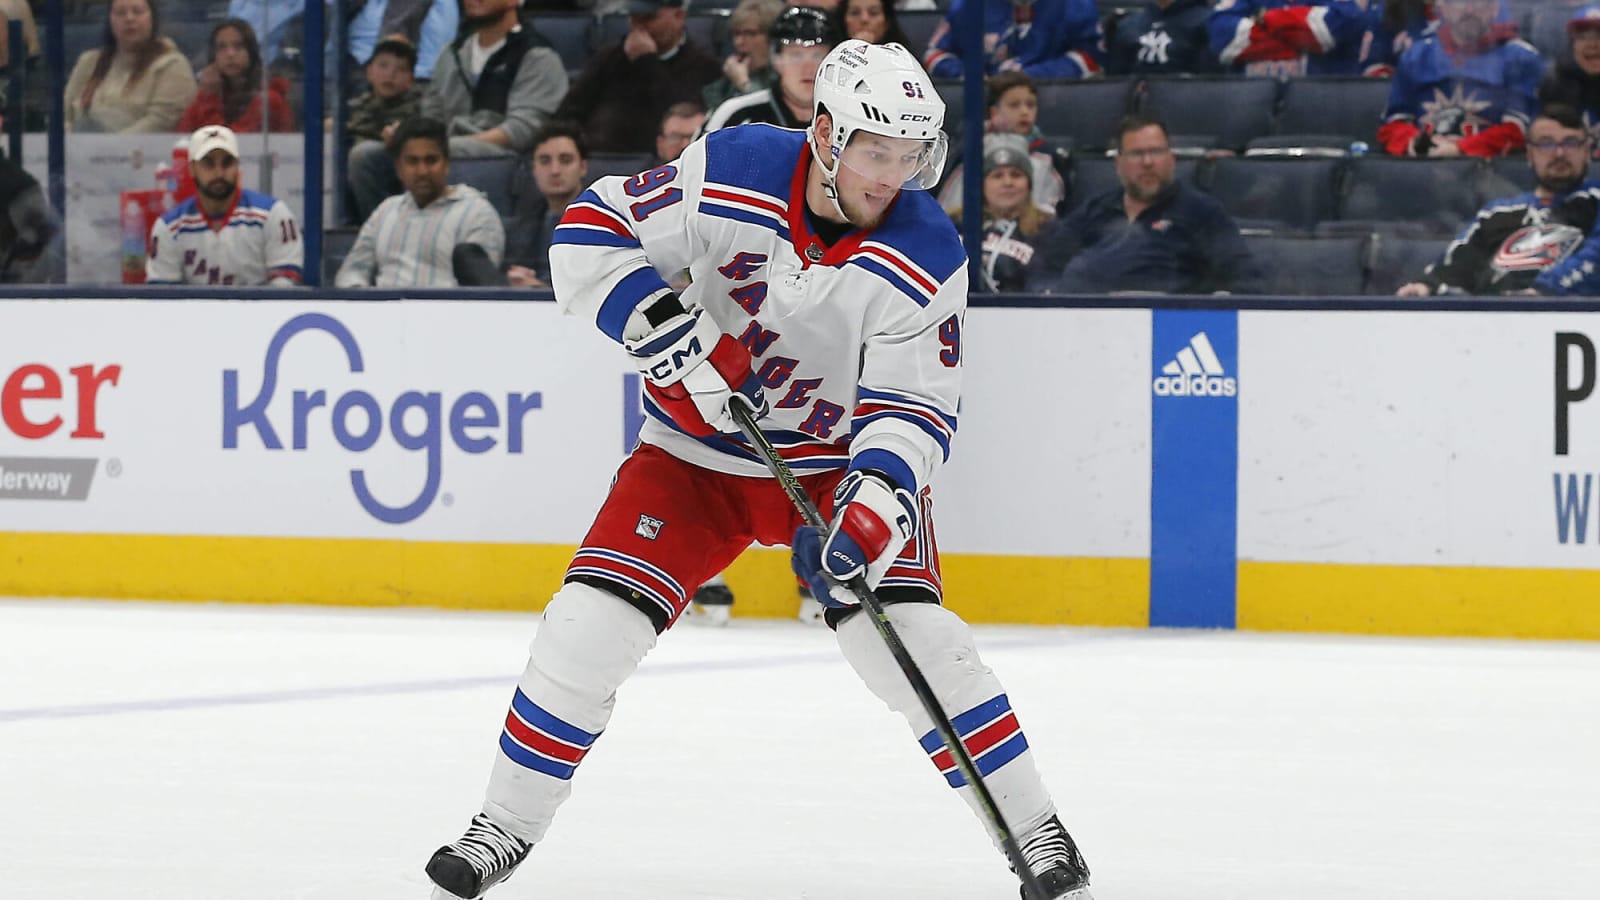 Rangers Need to Find Cap Space to Re-Sign Tarasenko